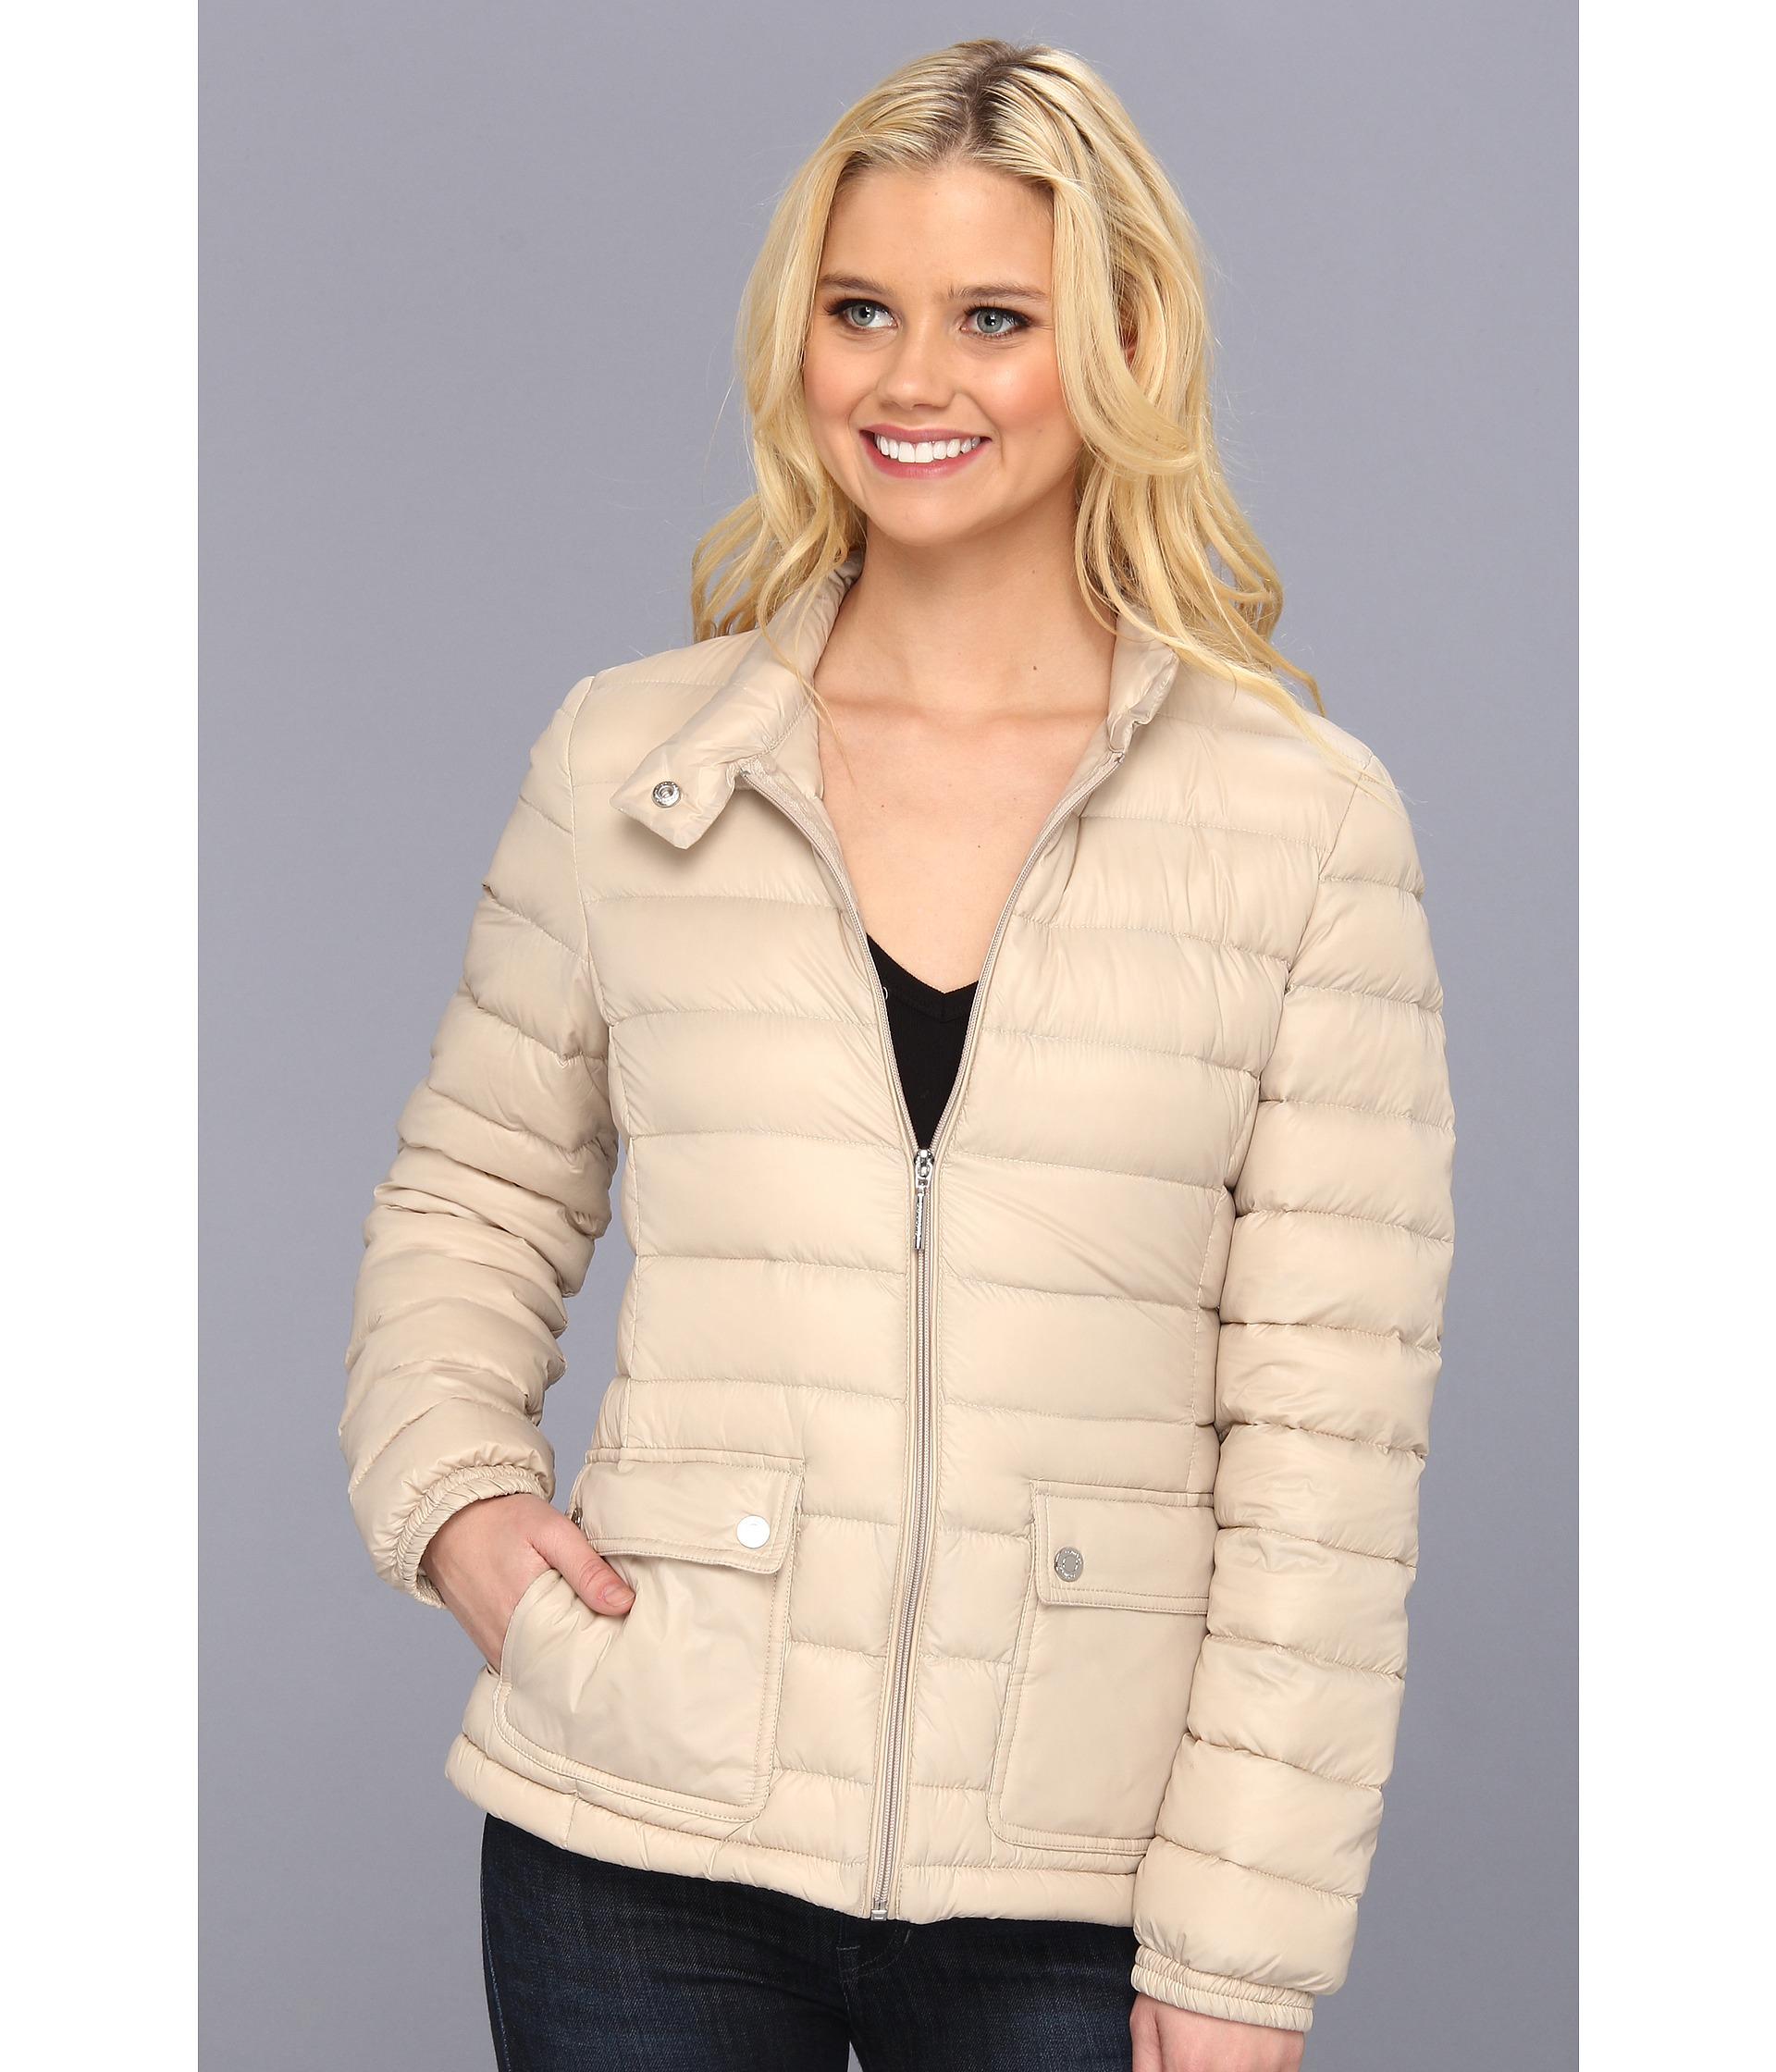 Lyst - Calvin Klein Packable Down Jacket in Natural